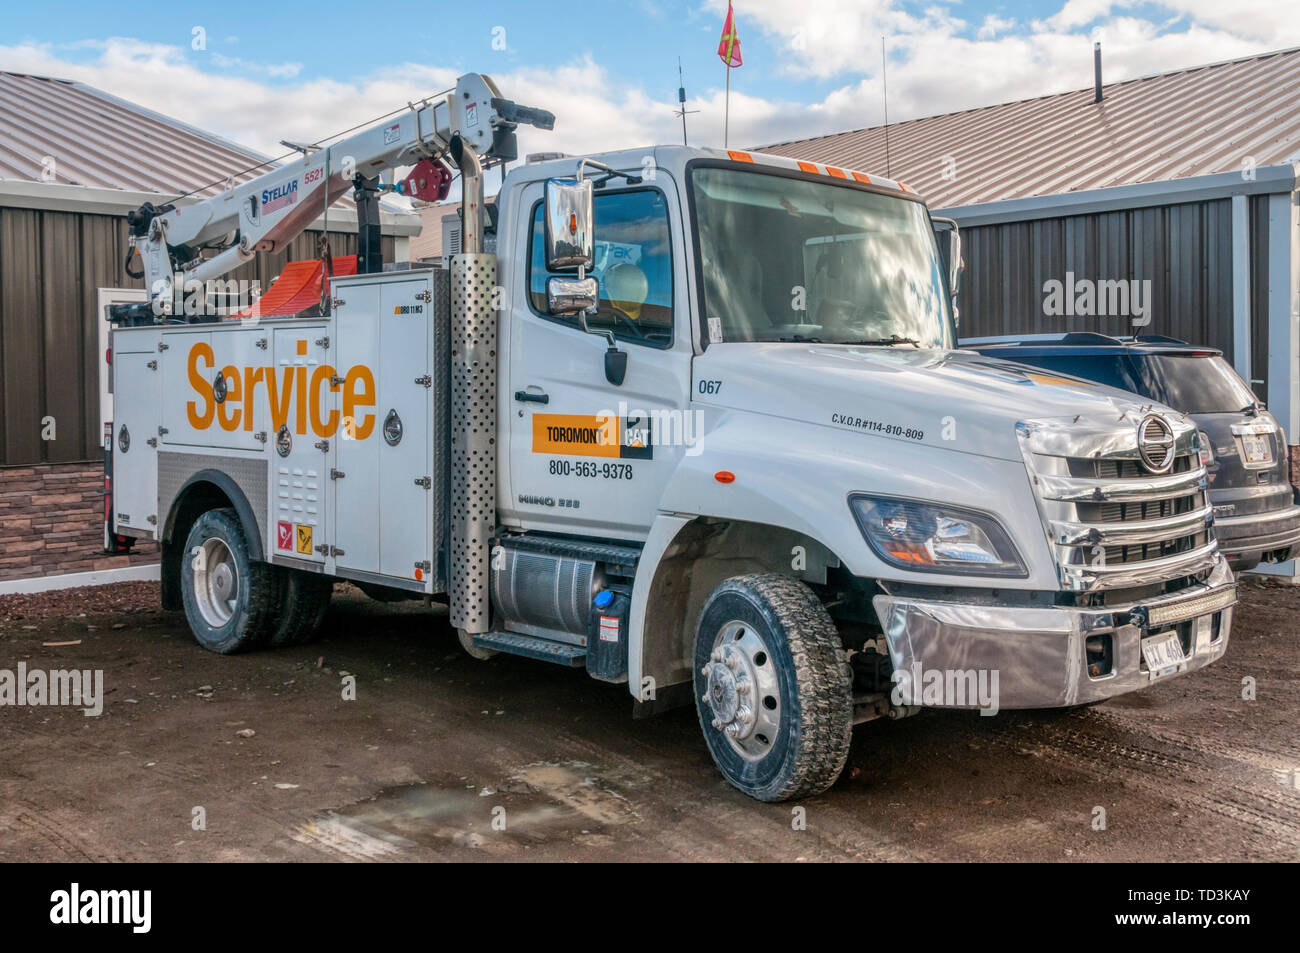 A Hino 258 utility vehicle fitted with a Stellar 5521 crane in Forteau, Labrador, Canada Stock Photo